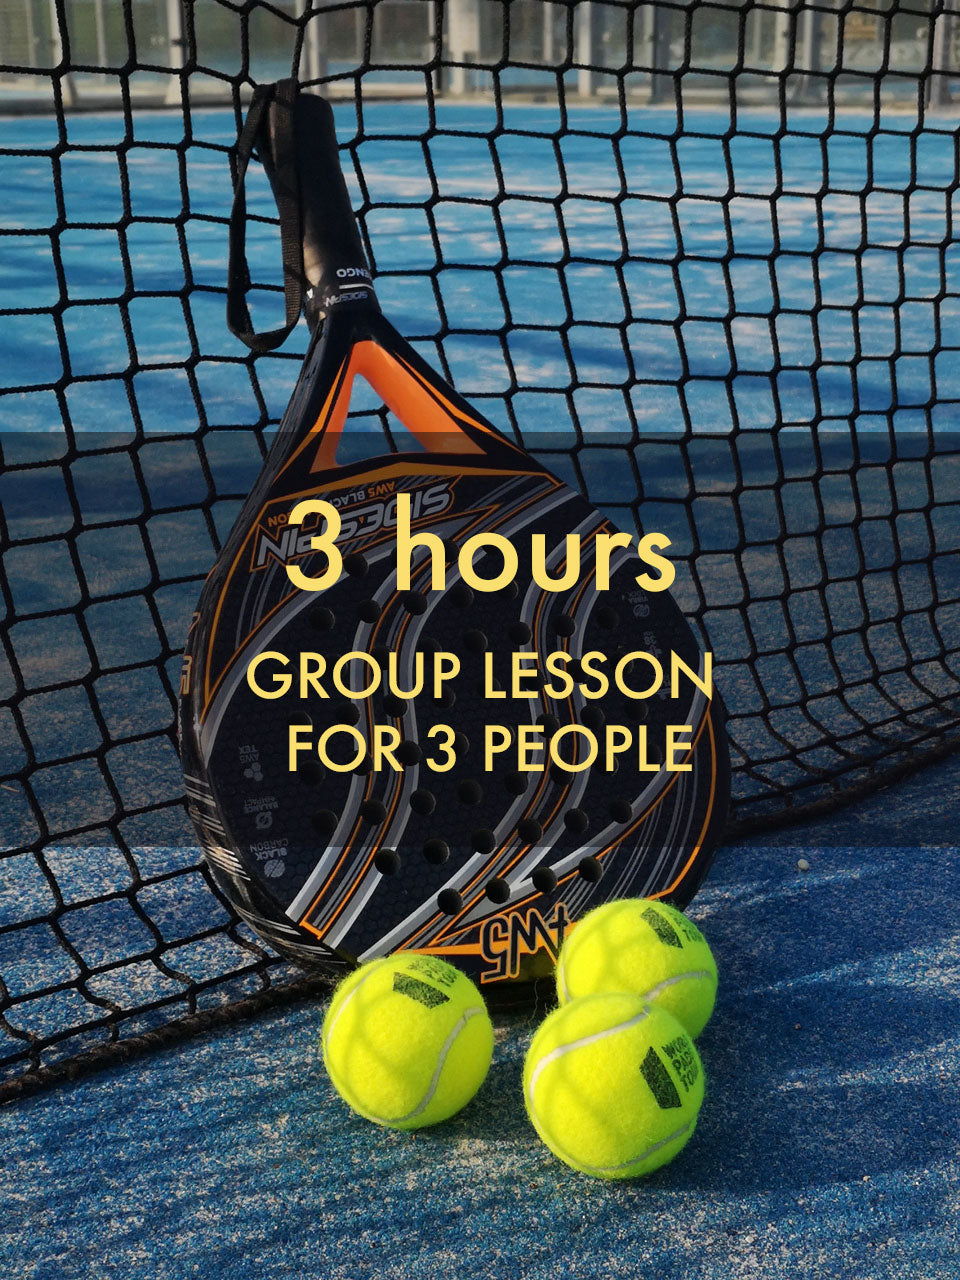 Group Paddle Tennis Lesson - Venice Beach - 3 hours training for 3 people